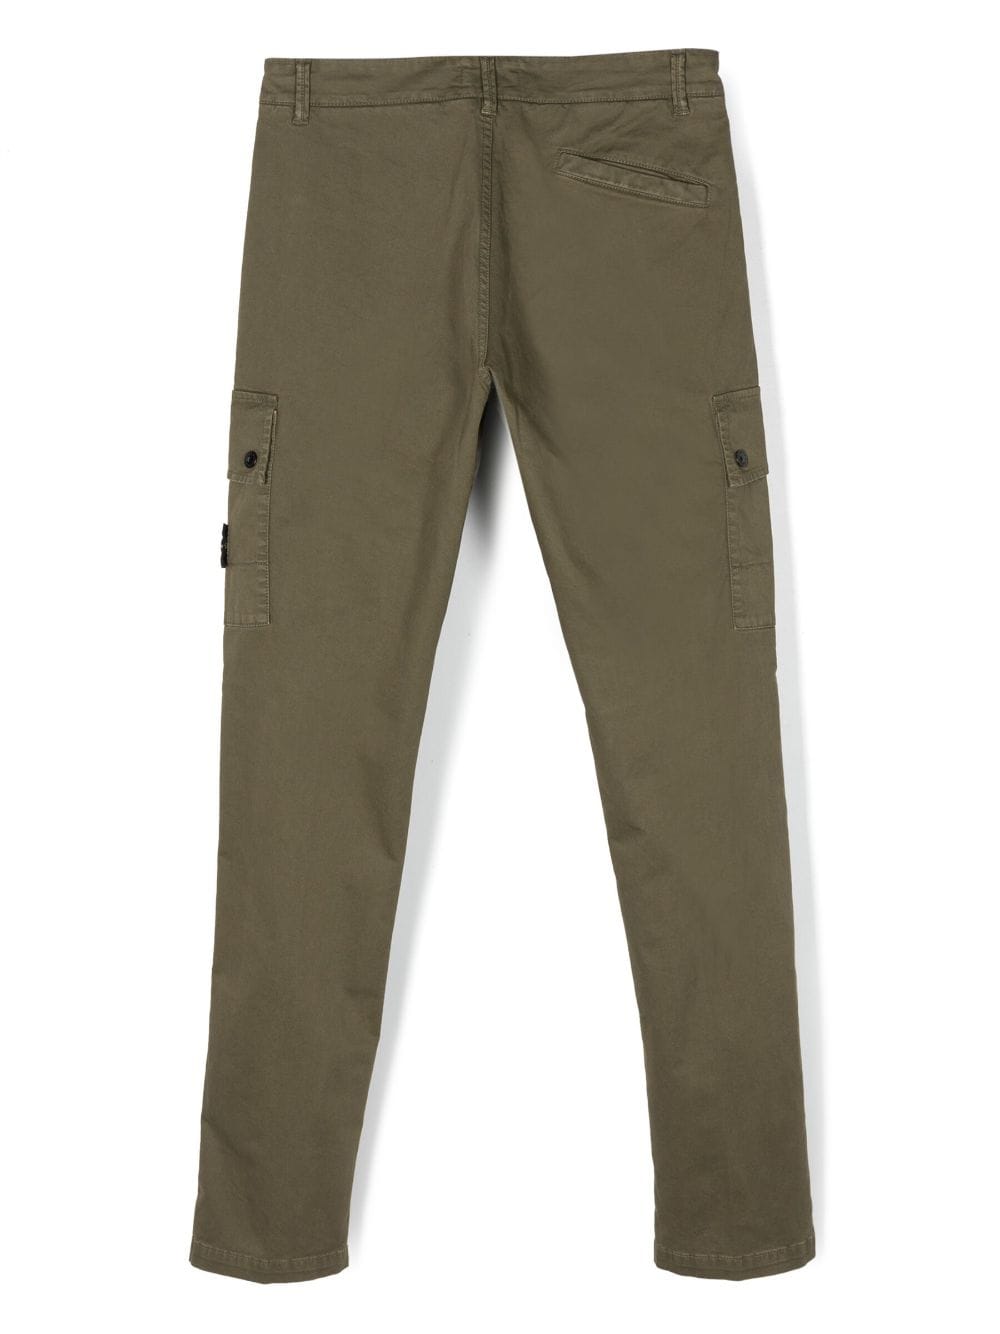 Green cargo trousers for boys with logo